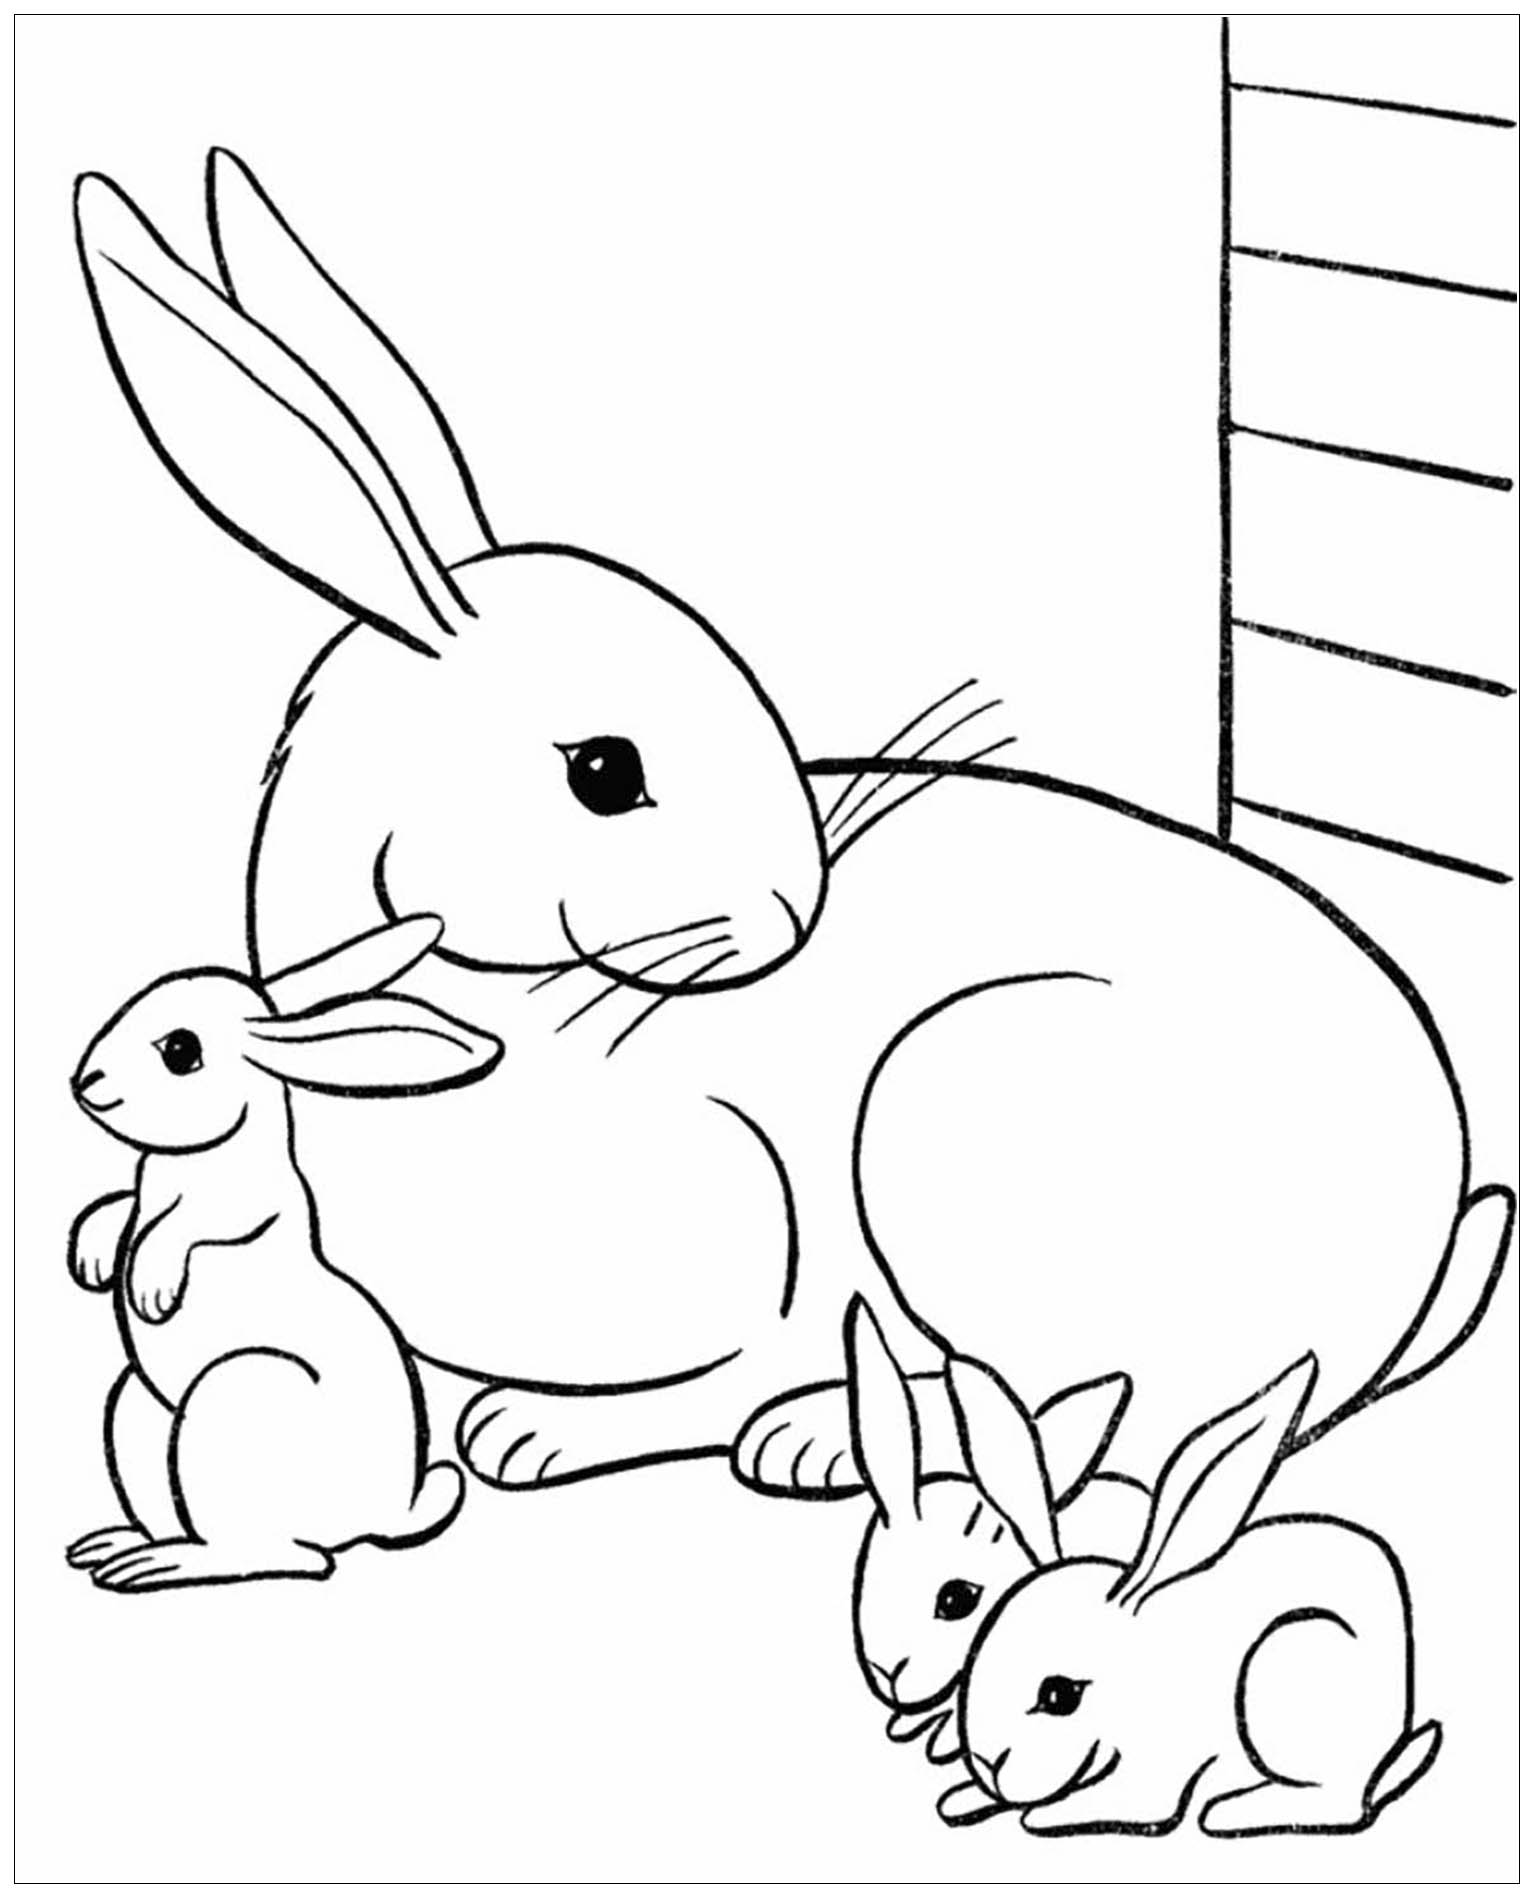 Rabbit to download Rabbit Kids Coloring Pages